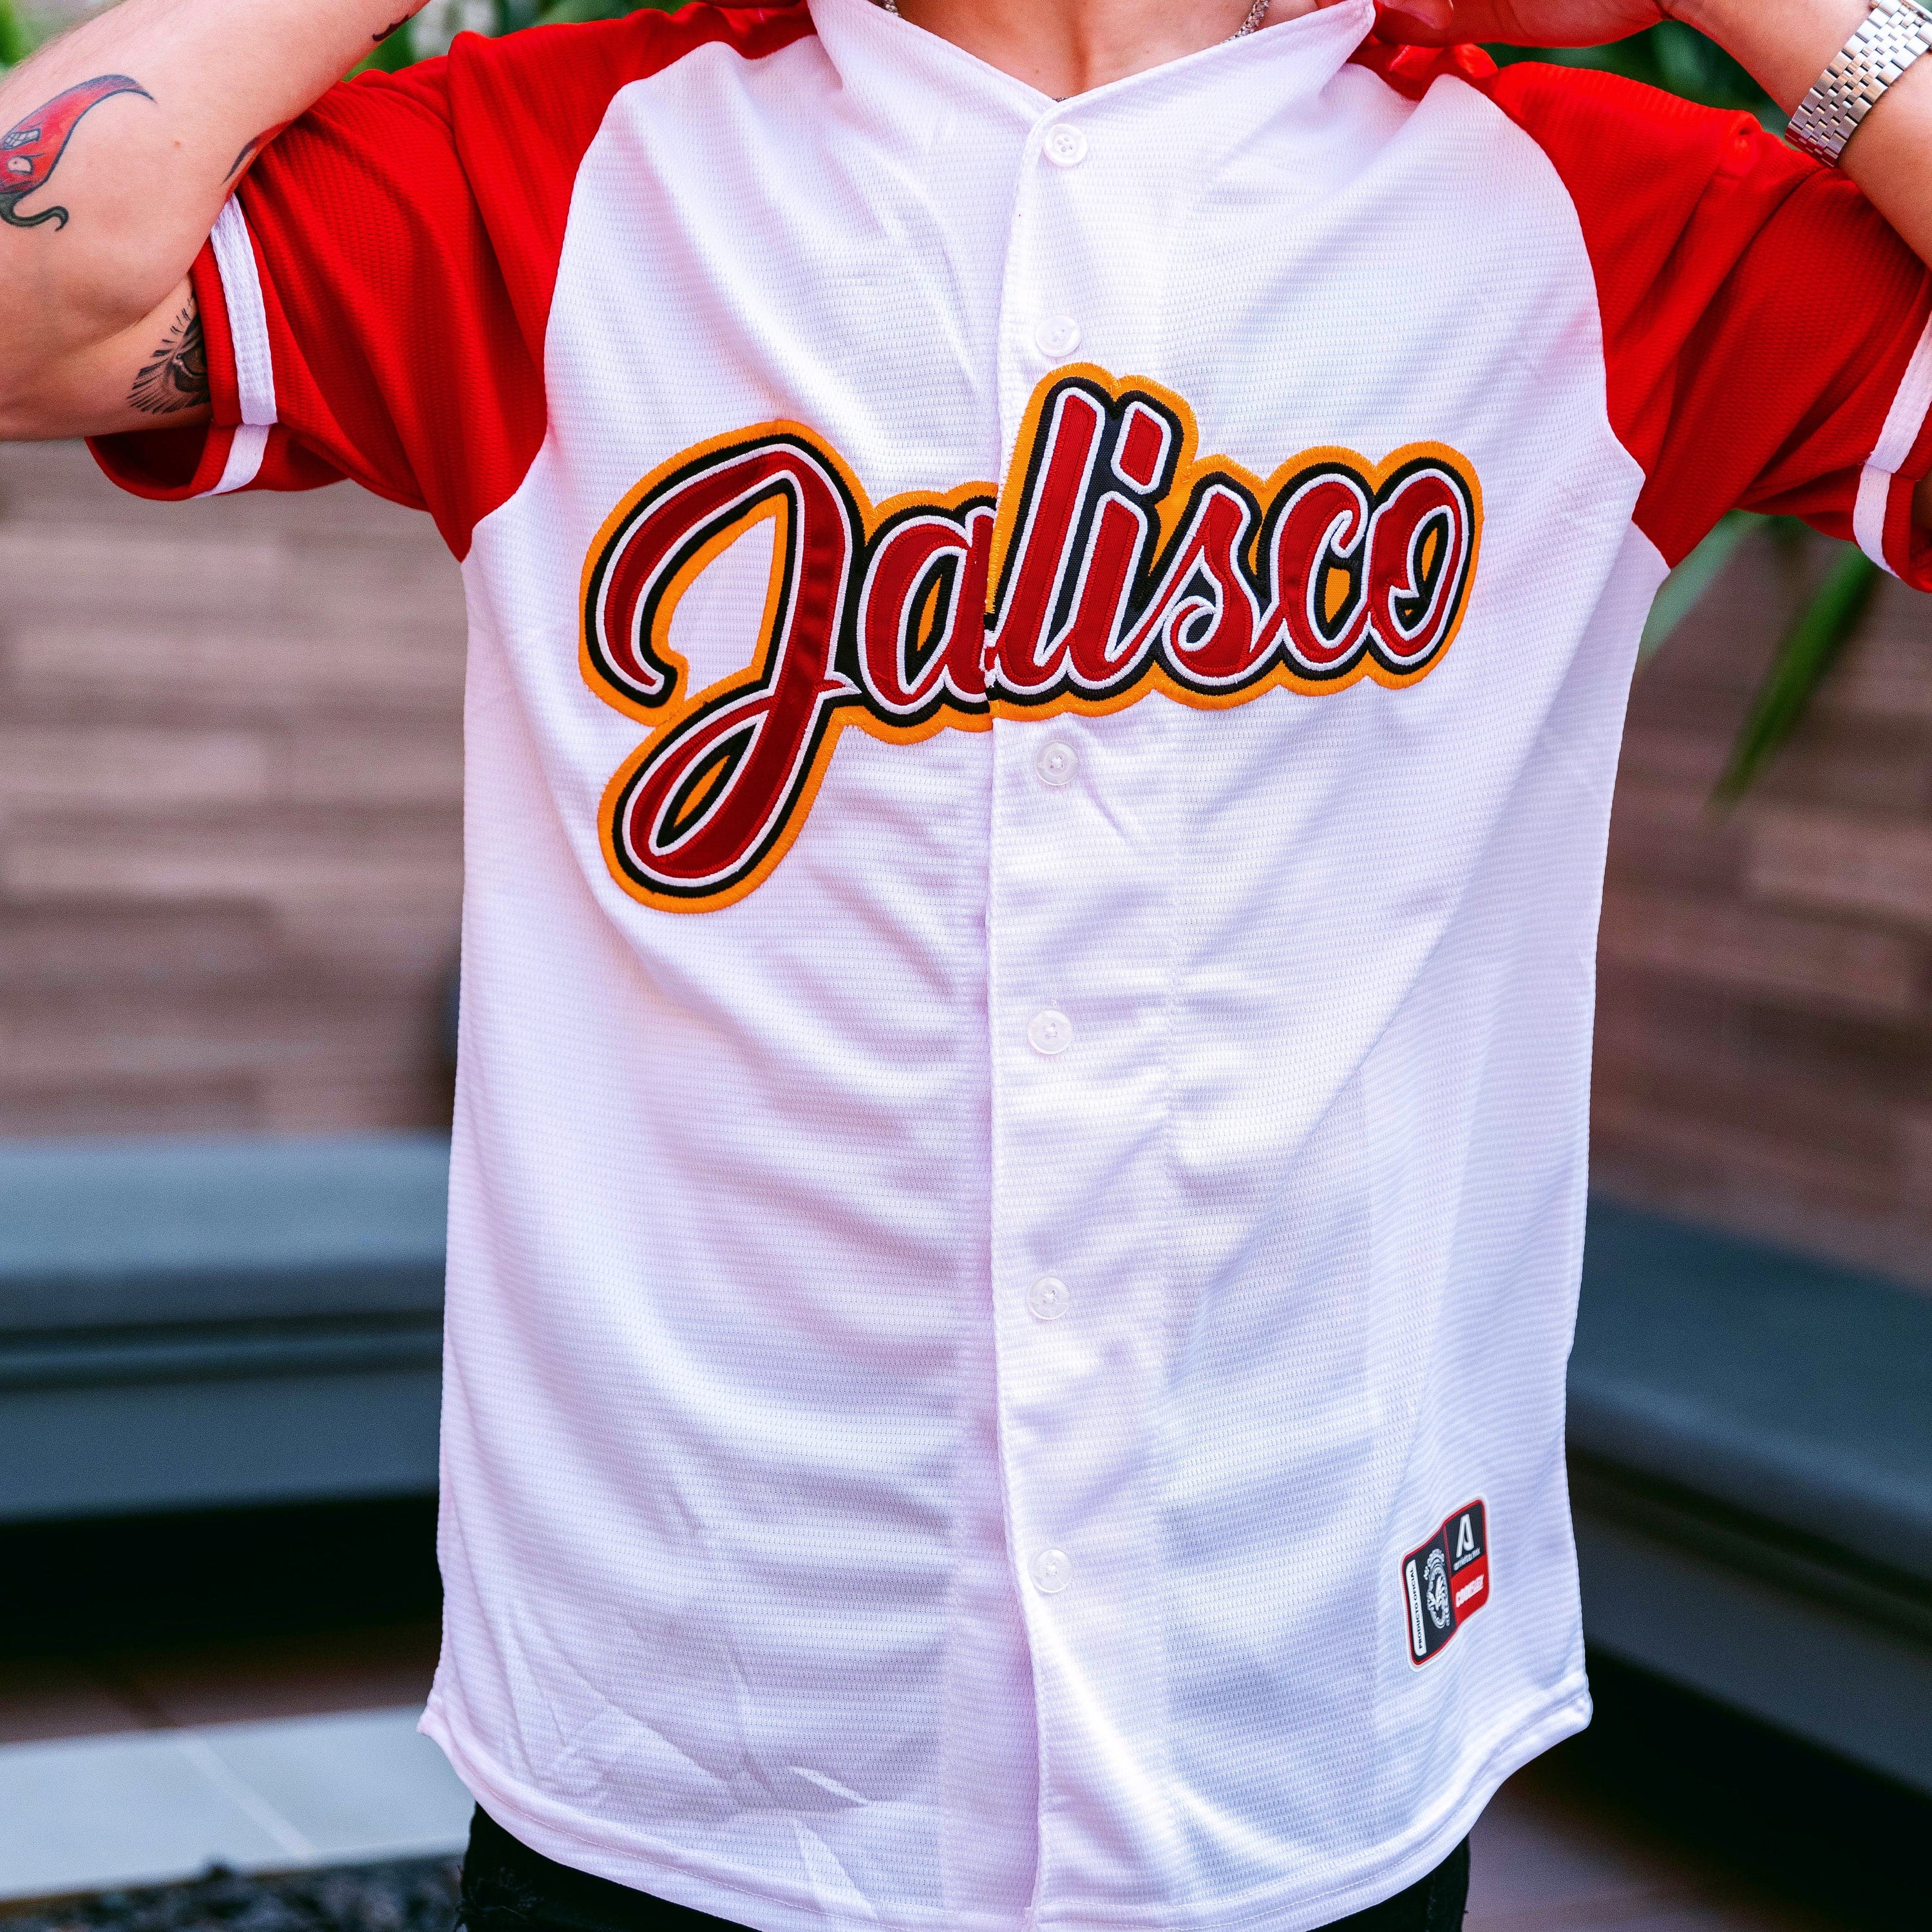 JALISCO WHITE/RED JERSEY